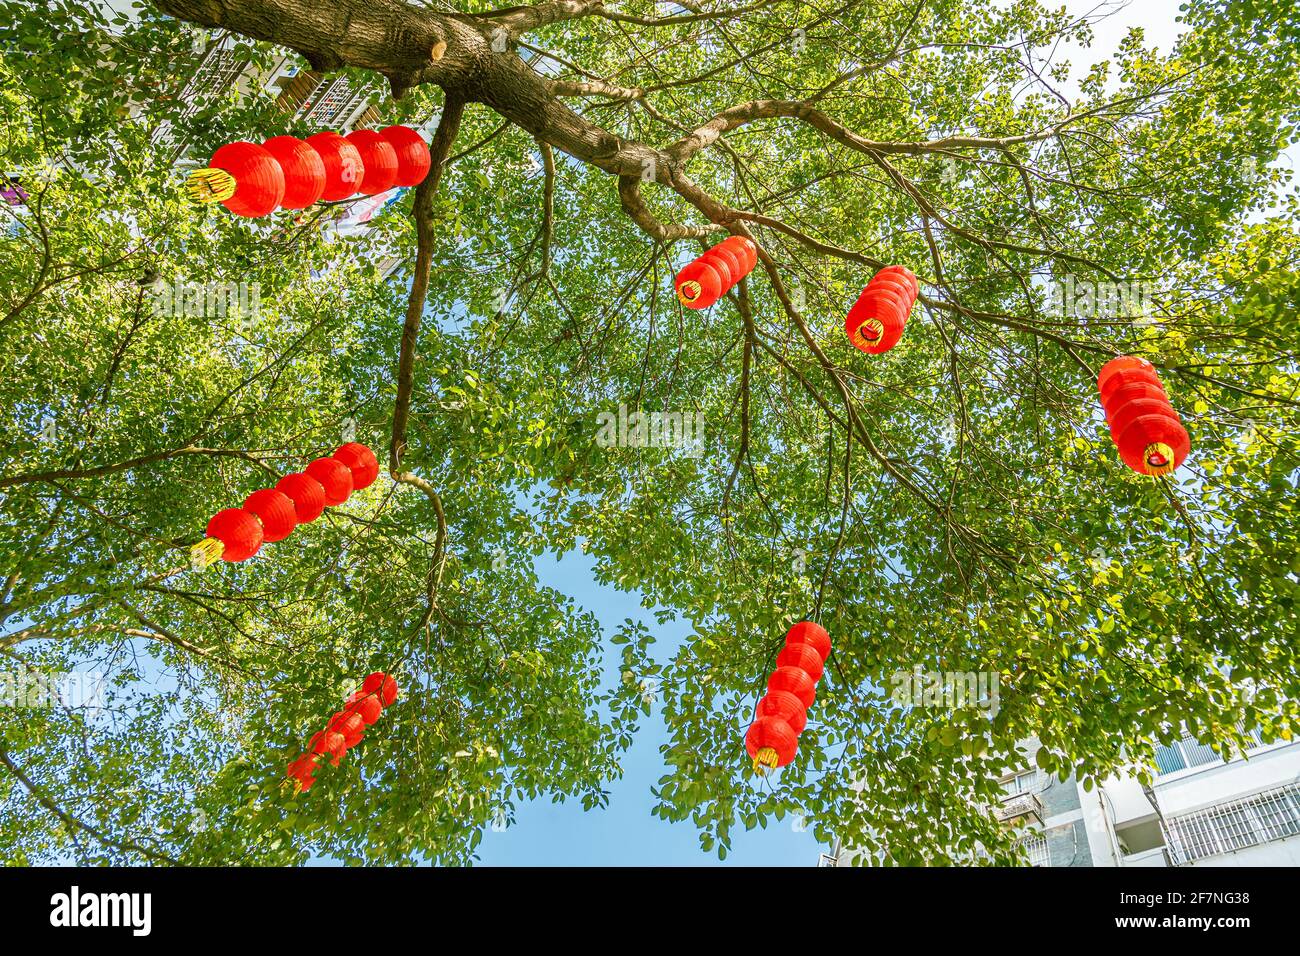 Red Lanterns hanging on trees in park for Chinese Lunar New Year,Fuzhou,China Stock Photo